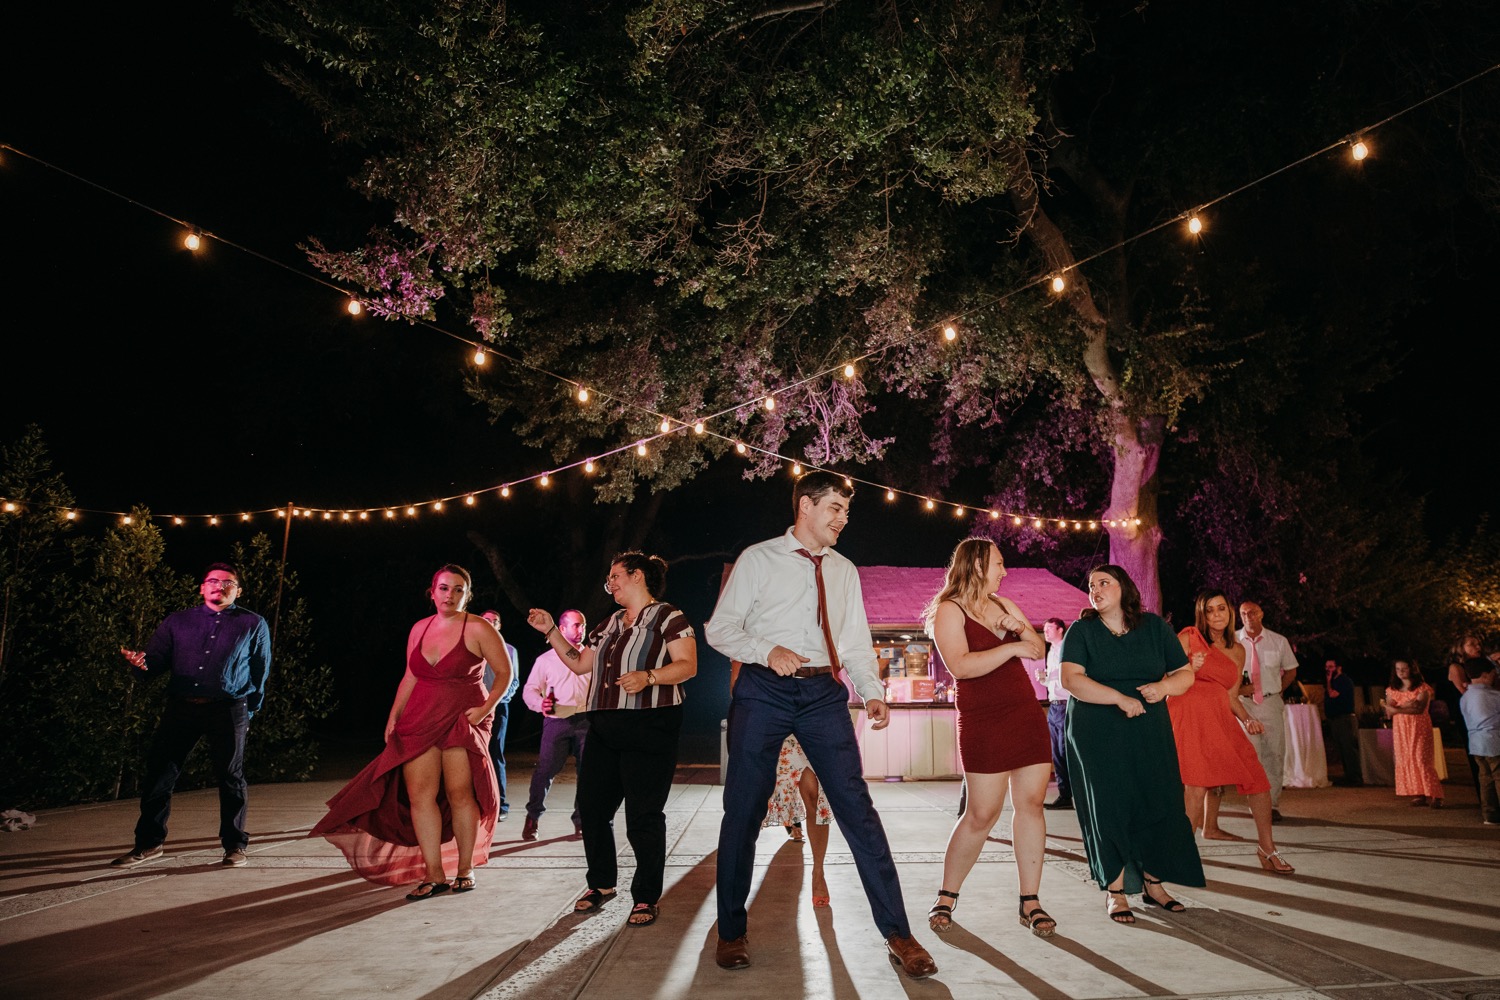 Guests dancing under the lights at Alayna and Trey's wedding at The Maples in Woodland, CA